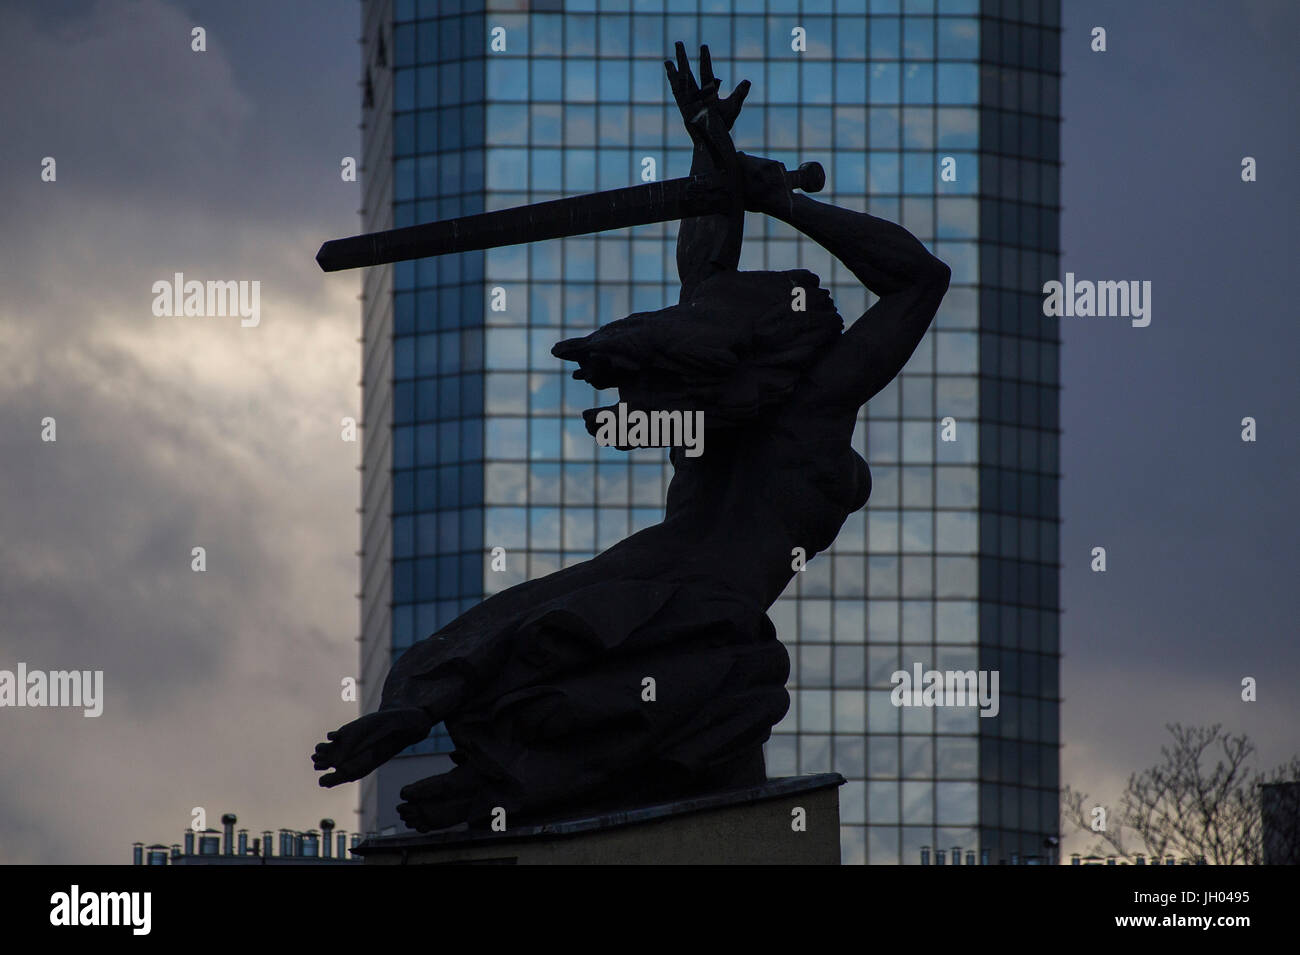 The Monument to the Heroes of Warsaw also known as the Warsaw Nike and Blekitny Wiezowiec (Blue Skyscraper) in Warsaw, Poland. 6 April 2017 © Wojciech Stock Photo